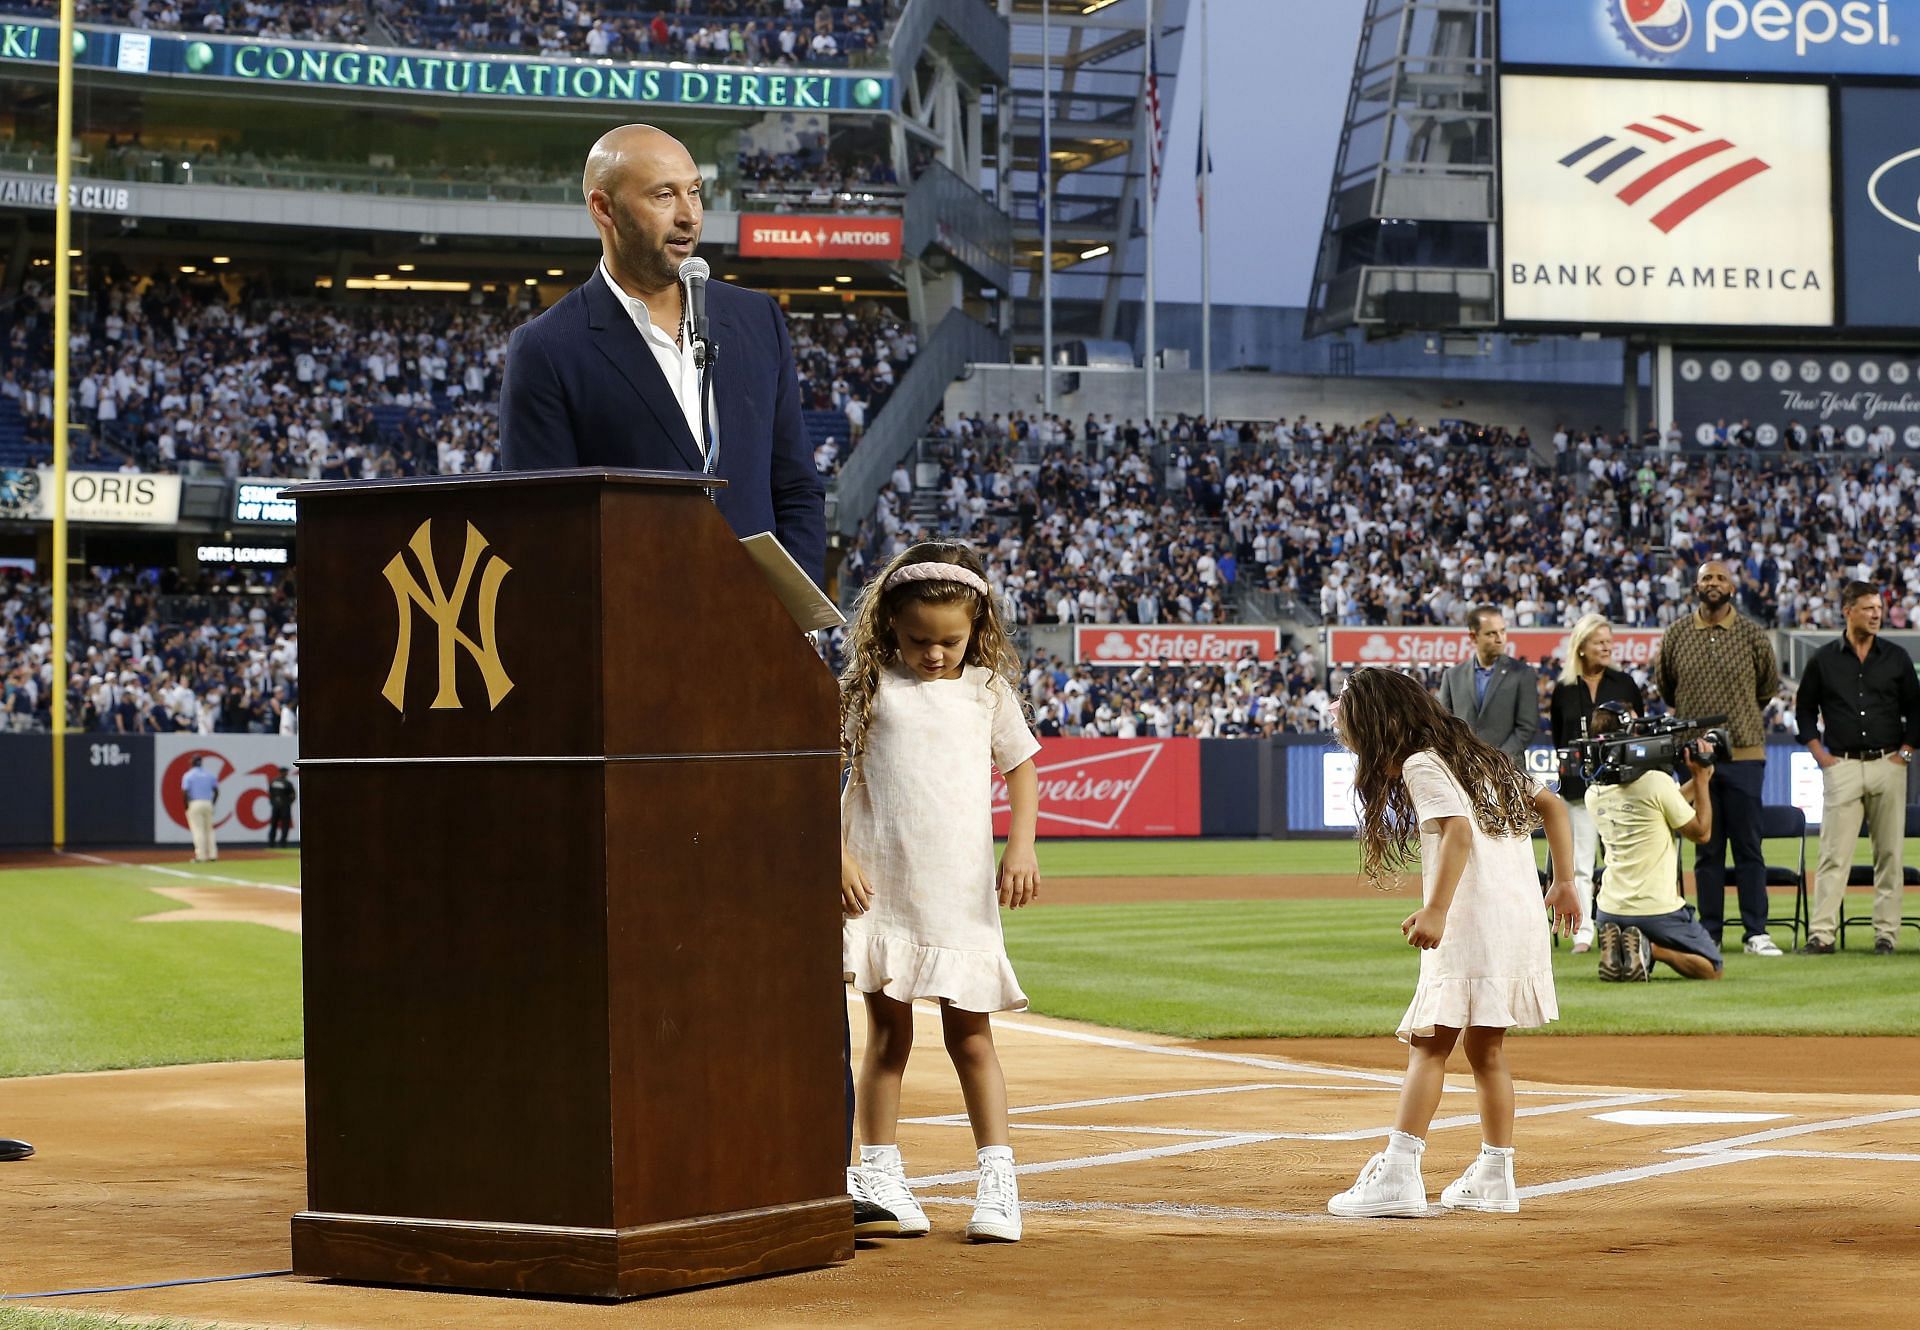 World Baseball Classic: Jeter wants to make amends for 2006